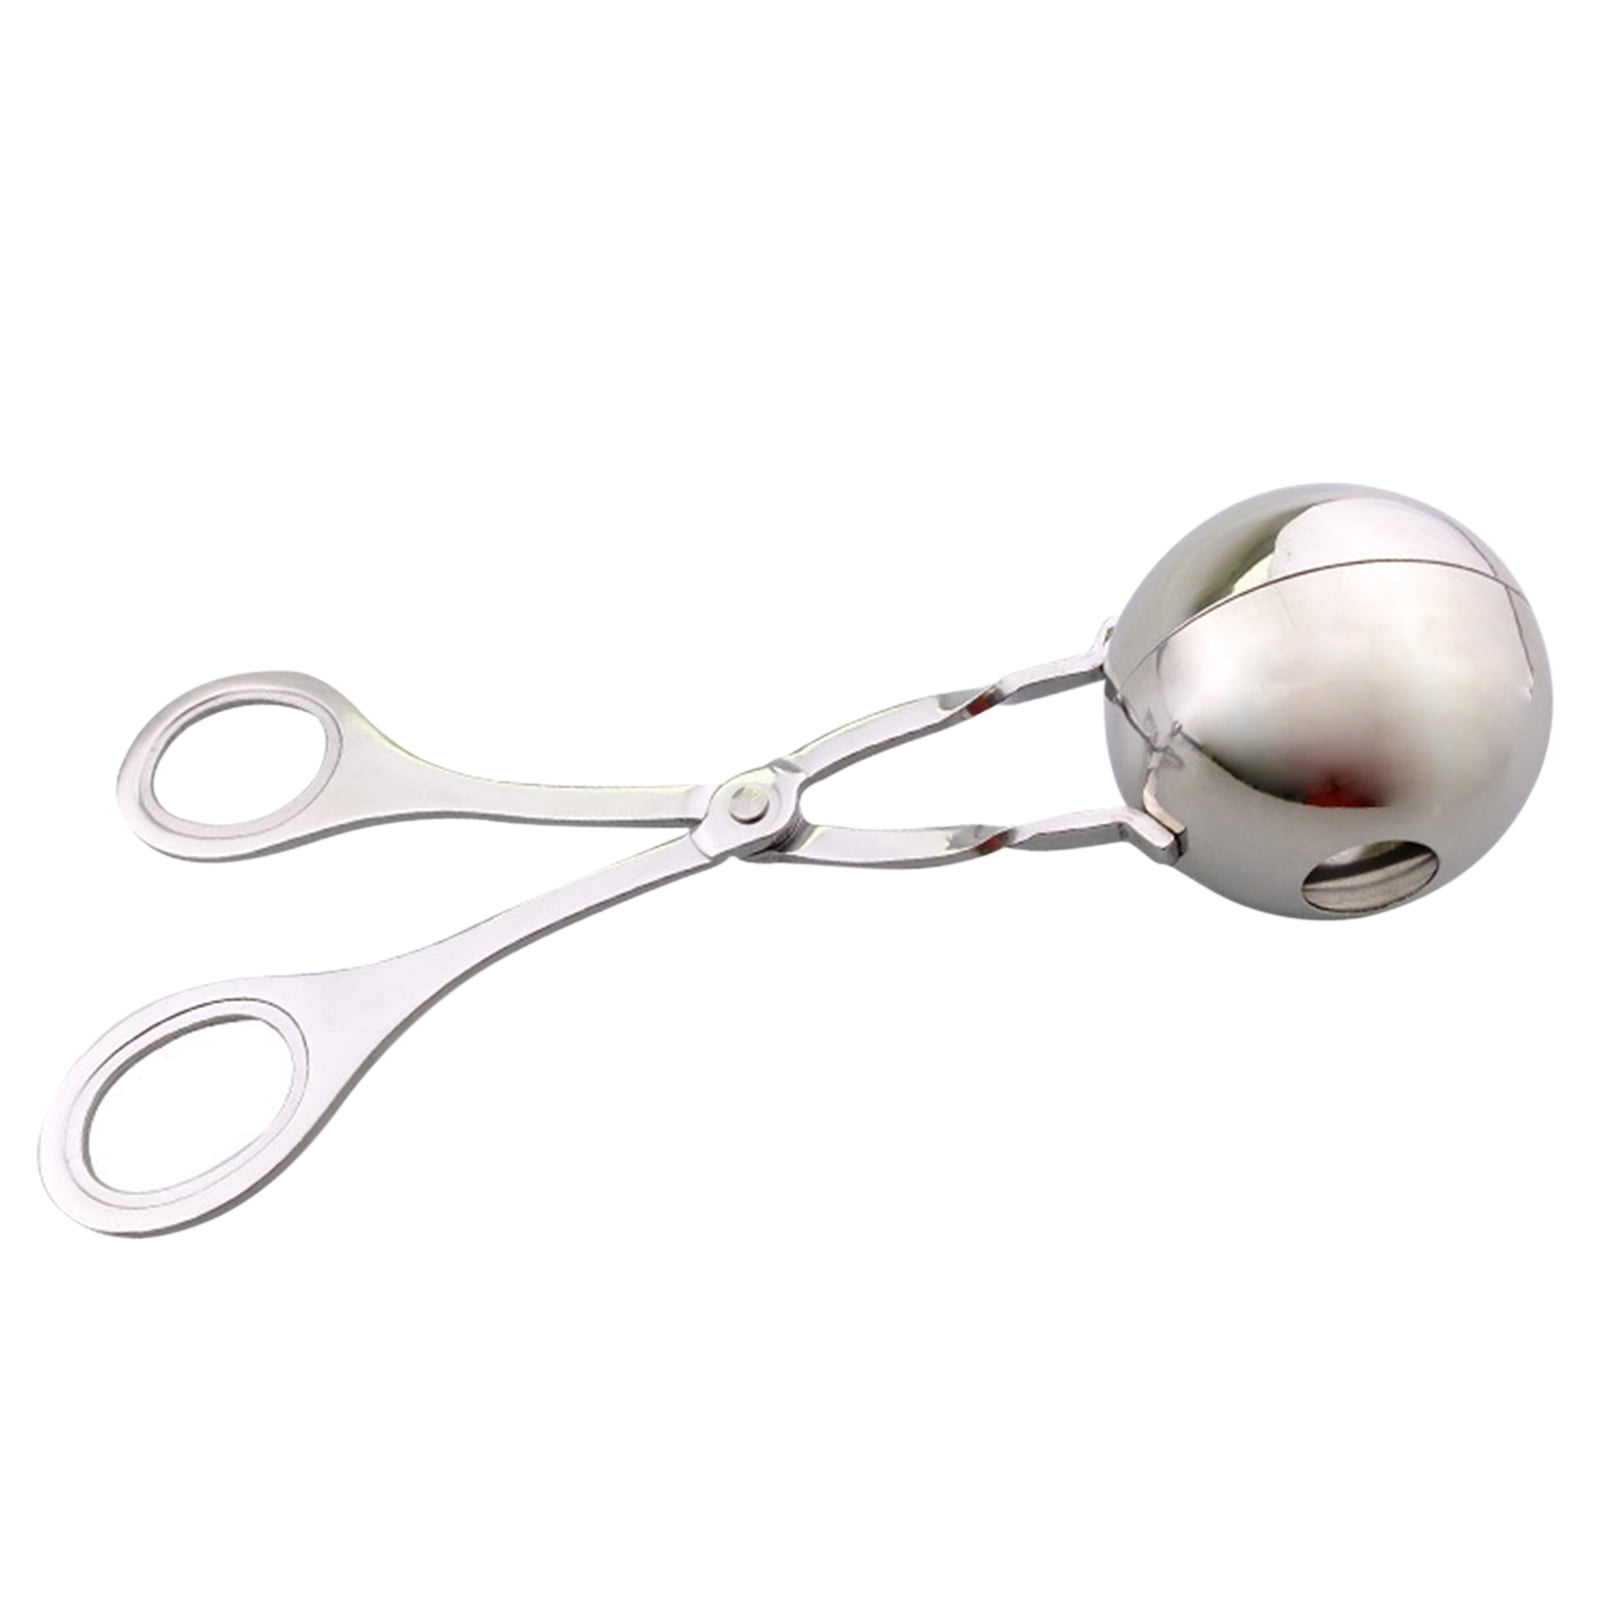 Cooyeah None-Stick Meat Baller Tongs Shaping Cake Pop Rice Dough Tongs Scoop Scooper. Meatball Makers Stainless Steel 